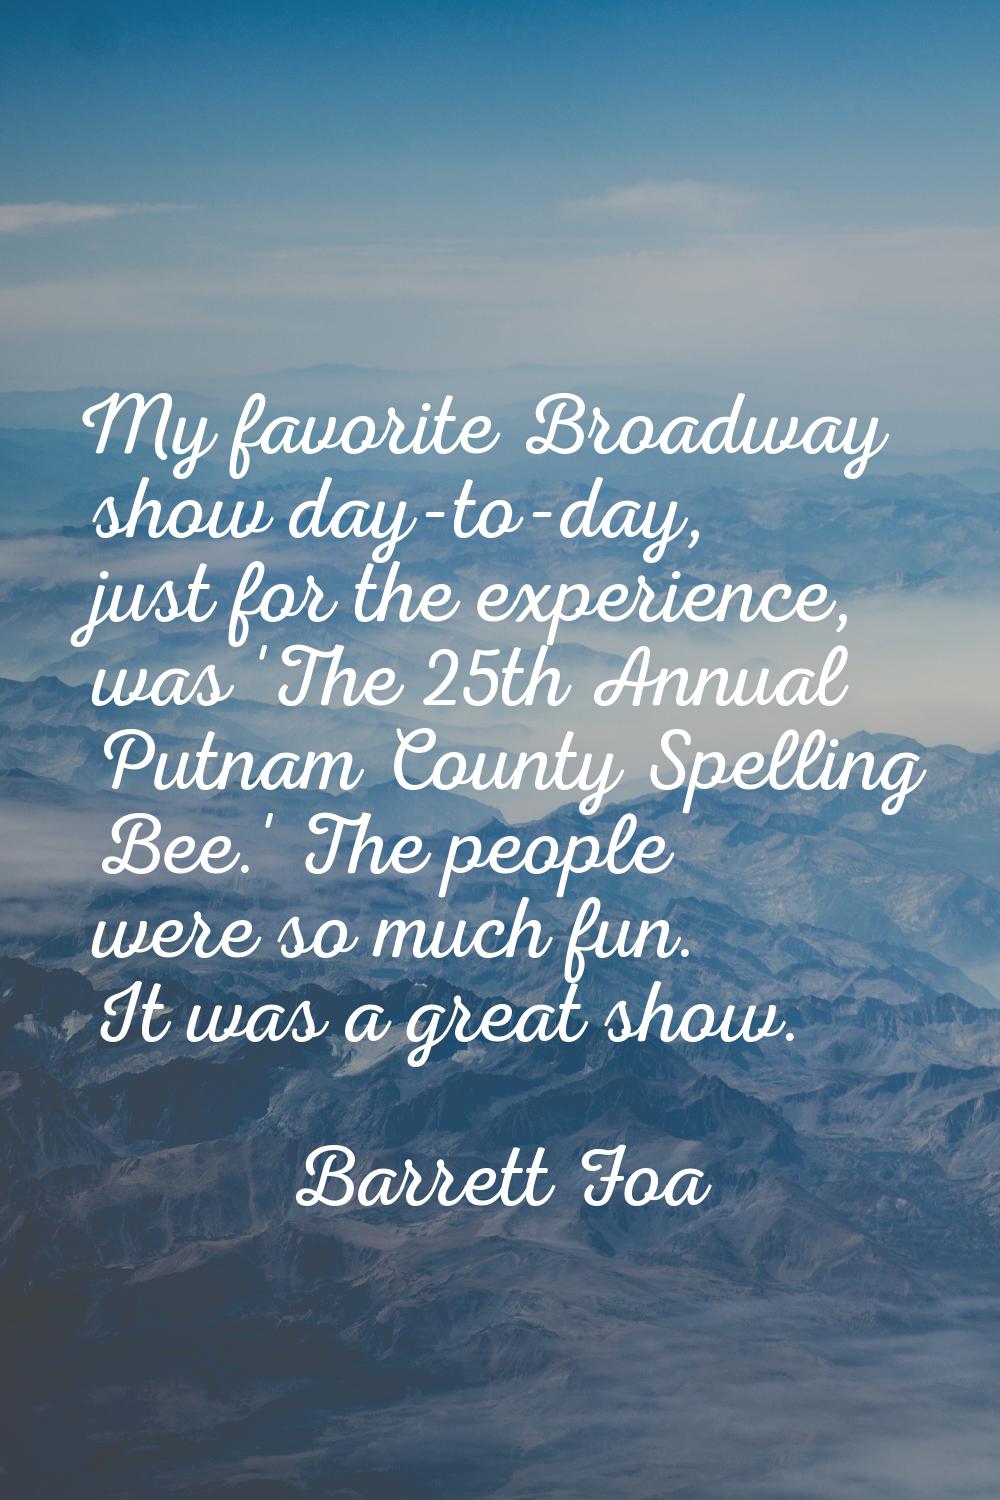 My favorite Broadway show day-to-day, just for the experience, was 'The 25th Annual Putnam County S